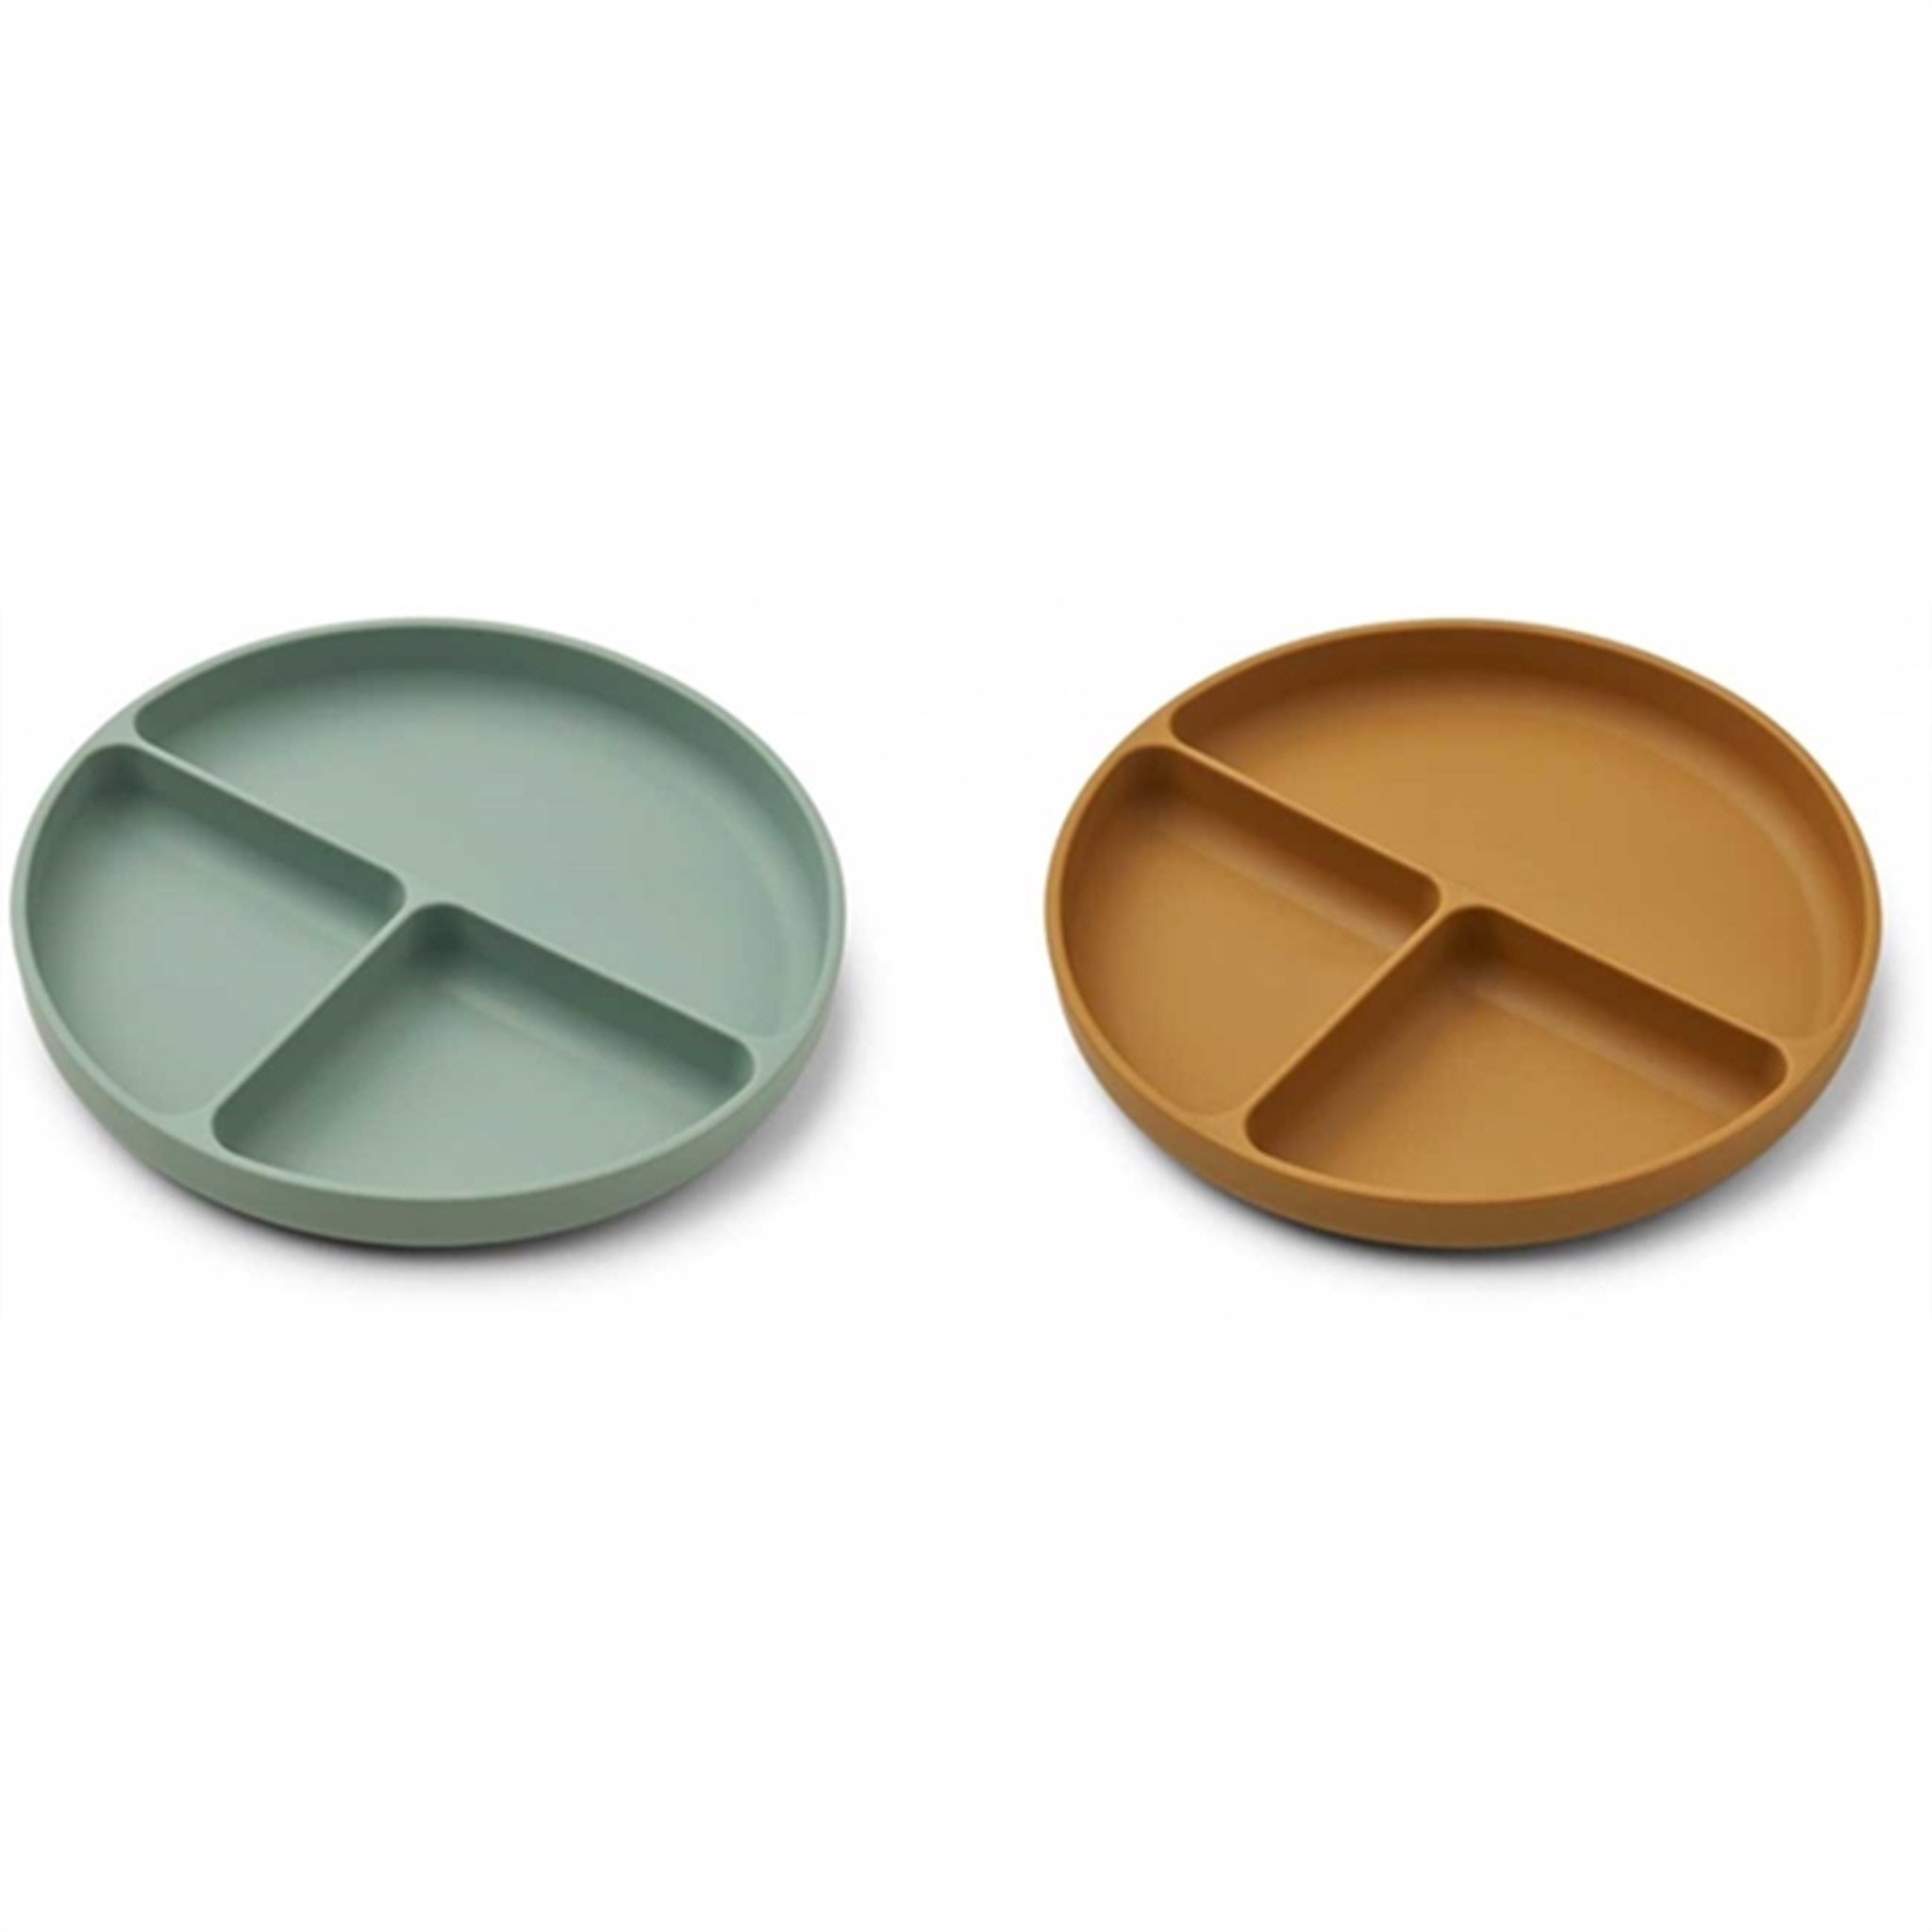 Liewood Harvey Silicone Divider Plate 2-pack Peppermint/Golden Caramel